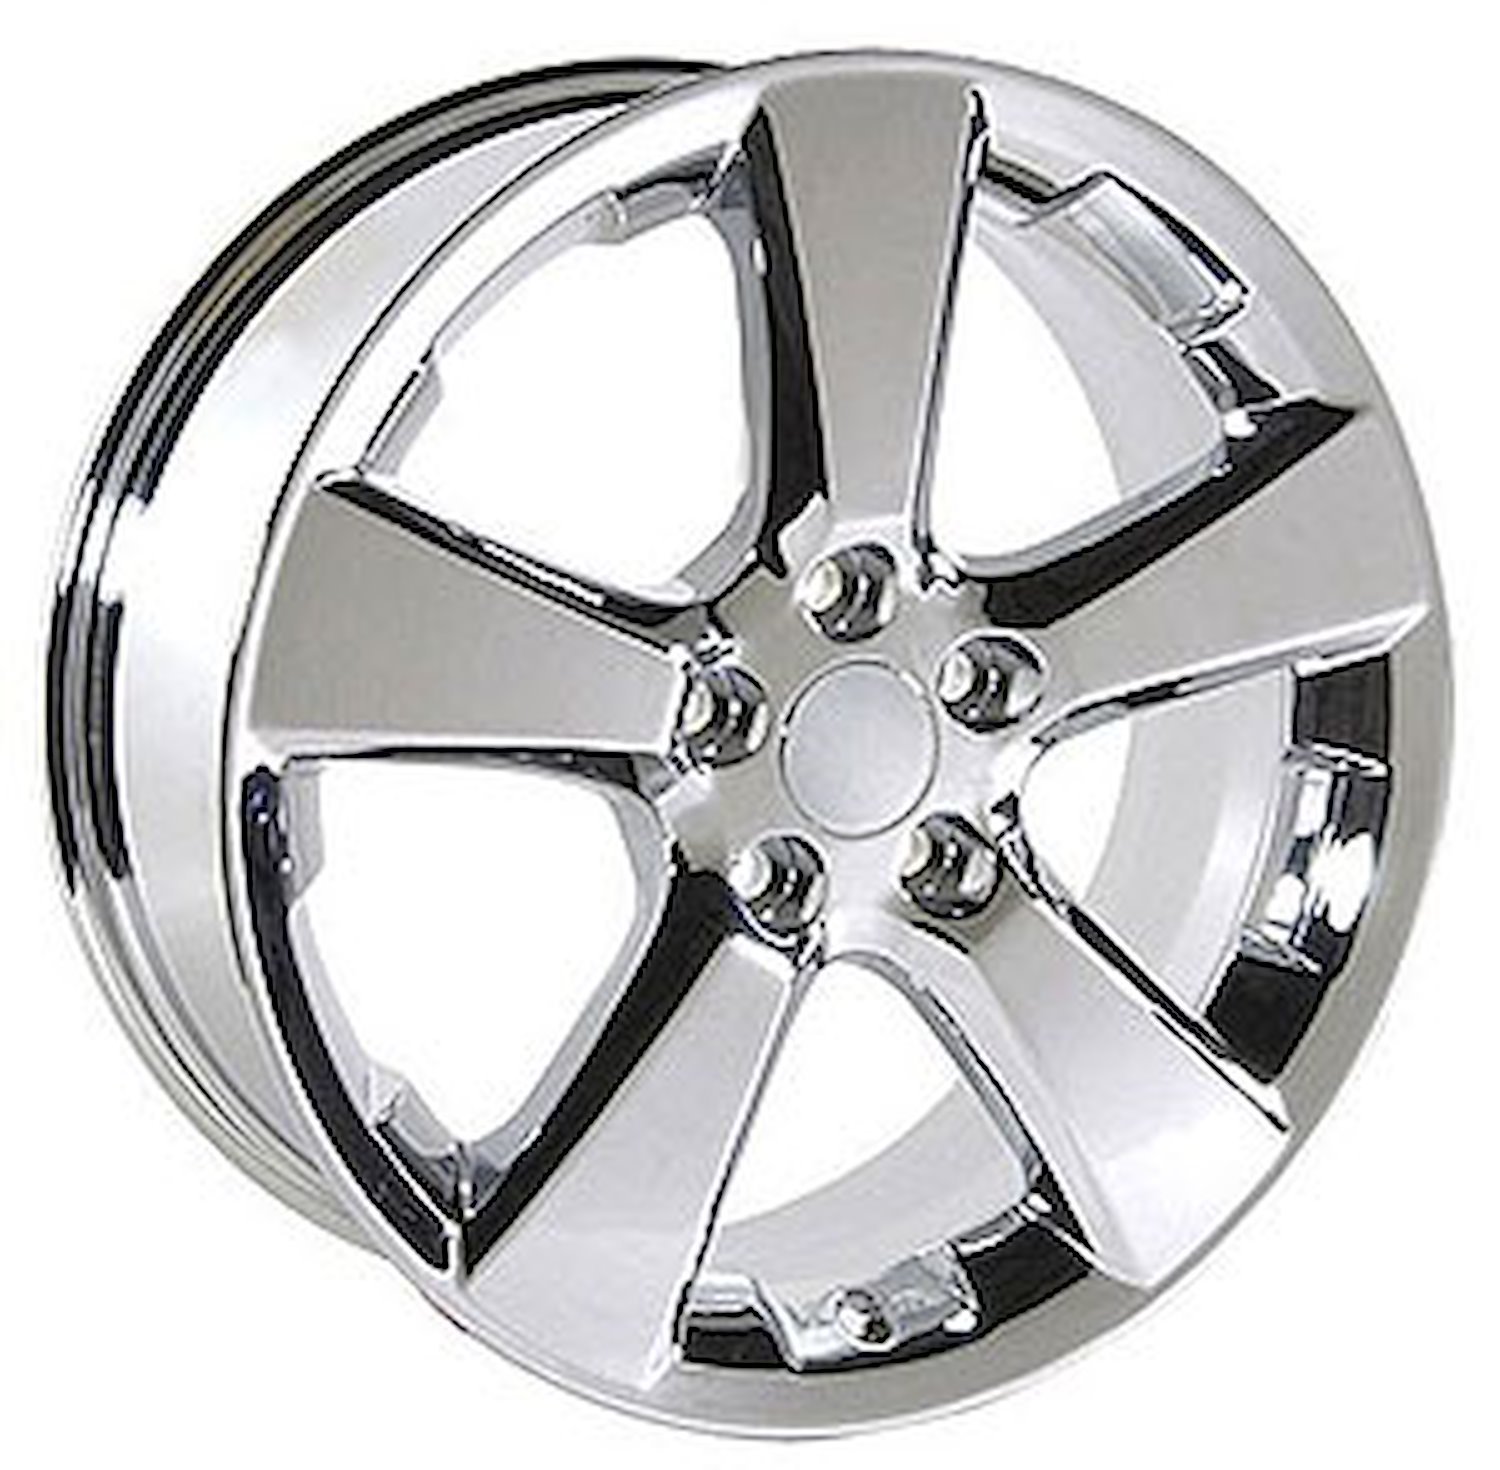 RX 330 Style Size: 18" x 7"